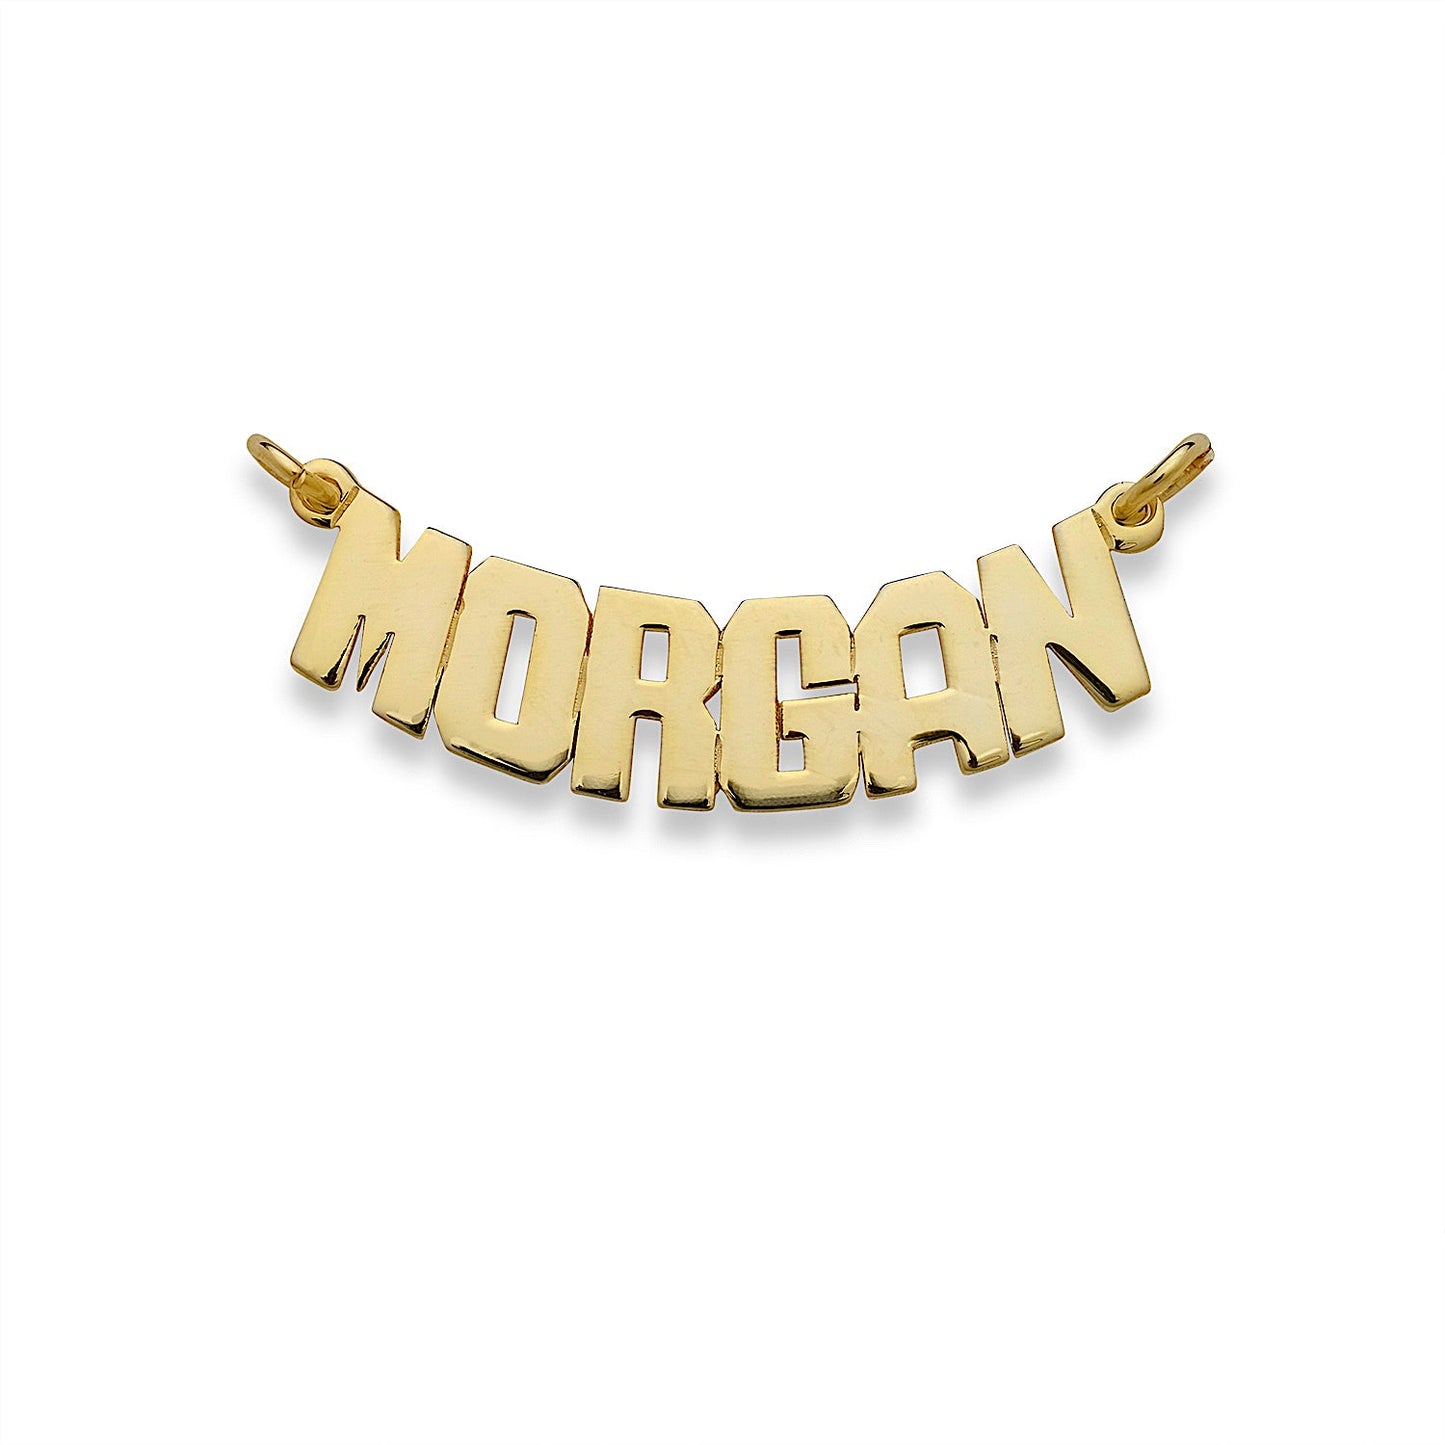 Better Jewelry Curb Block 14K Gold Nameplate Necklace